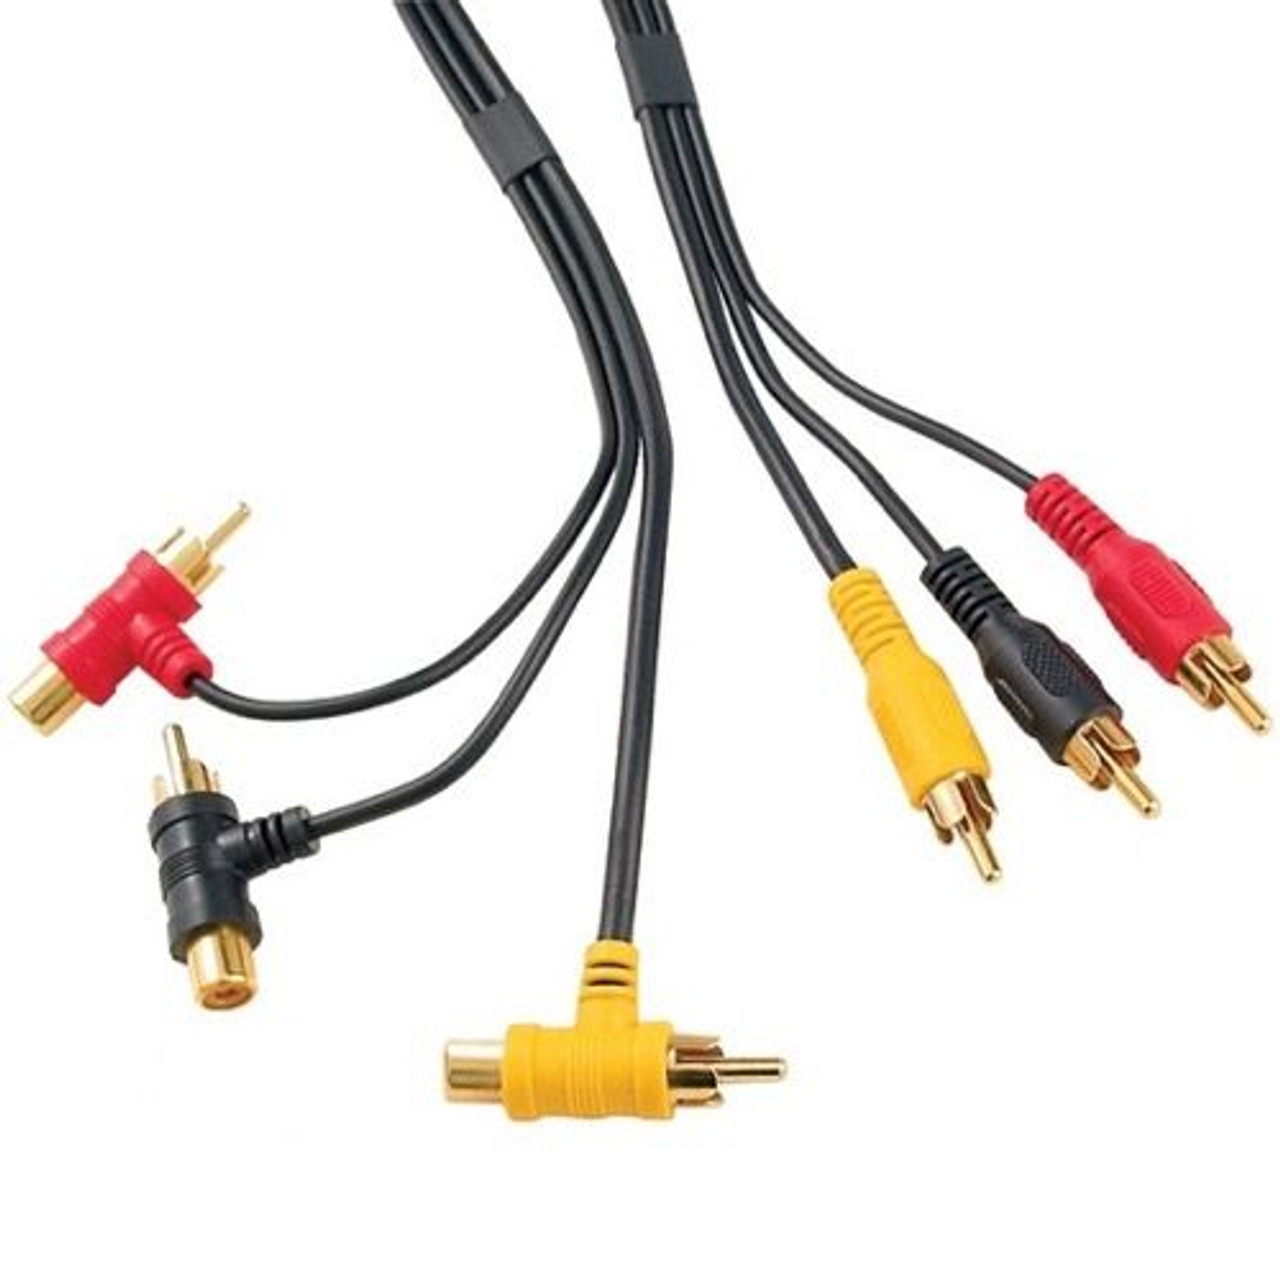 Linear 2743 Cable Set RCA Loop Thru Audio / Video Cable for 5500 Series Video Modulators, RCA Loop-Thru Cable Set Connection without Y Adapters, Part # CP2743